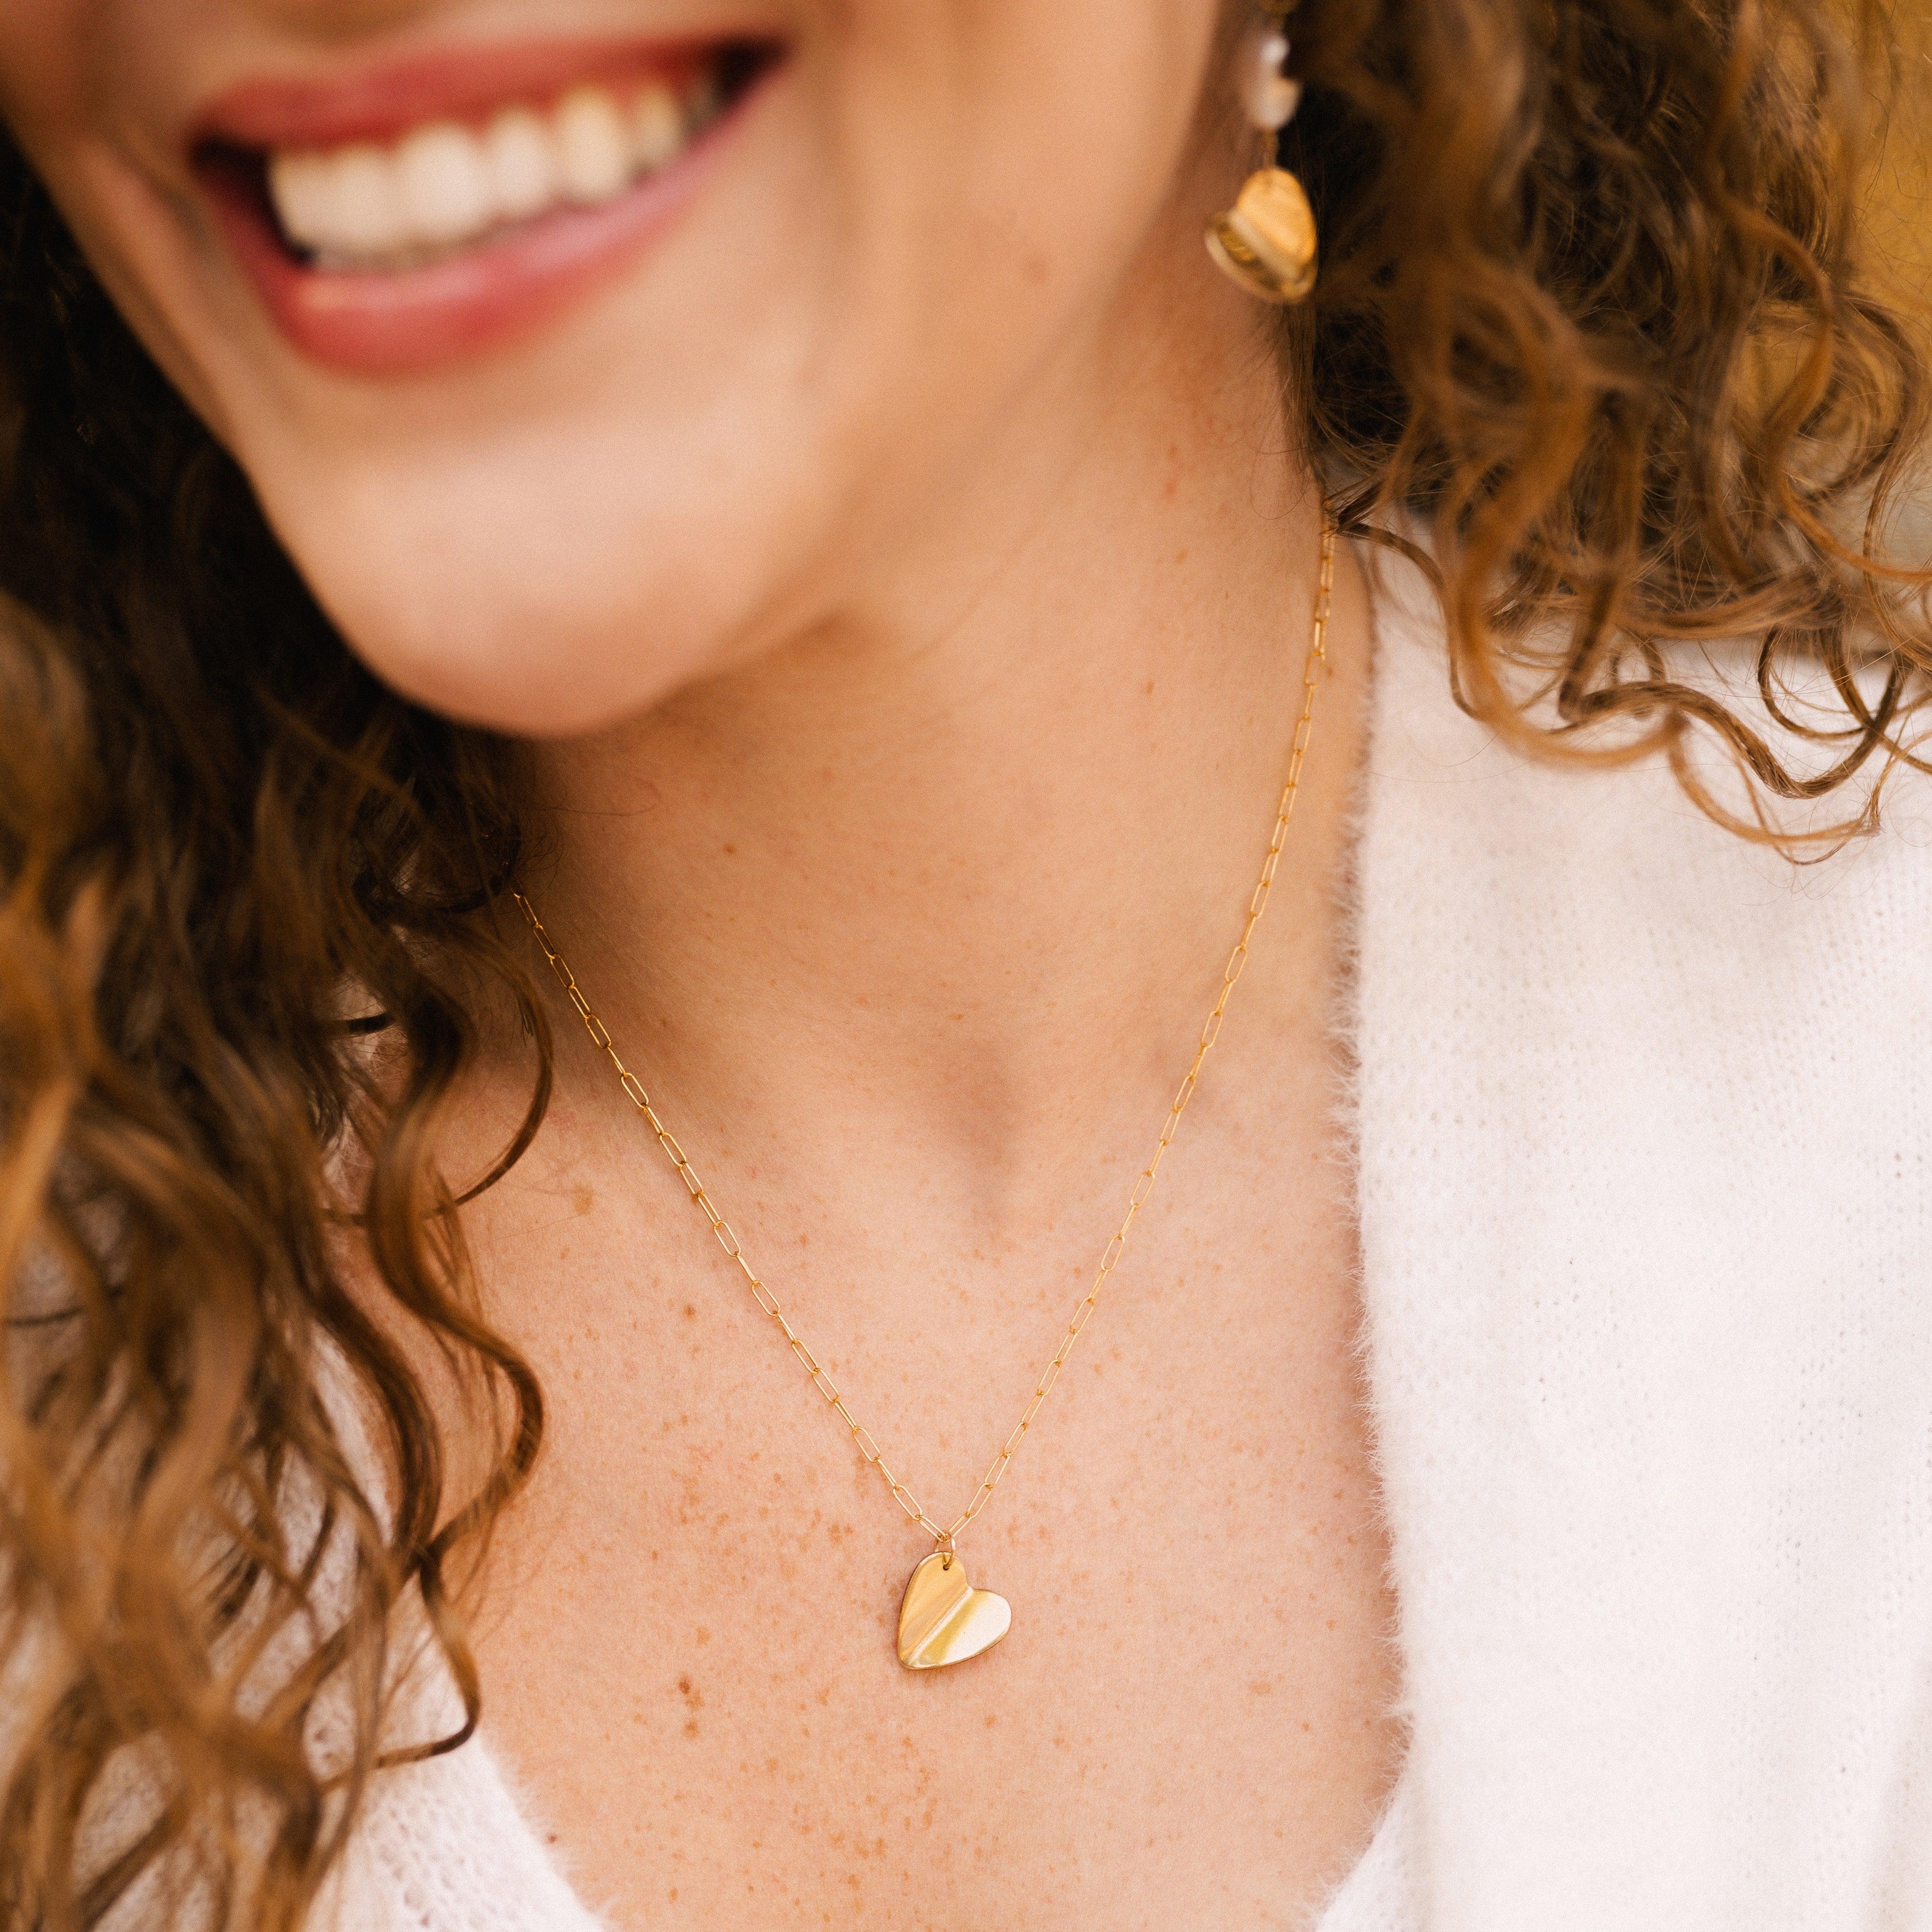 Paper Heart Necklace - Nolia Jewelry - Meaningful + Sustainably Handcrafted Jewelry